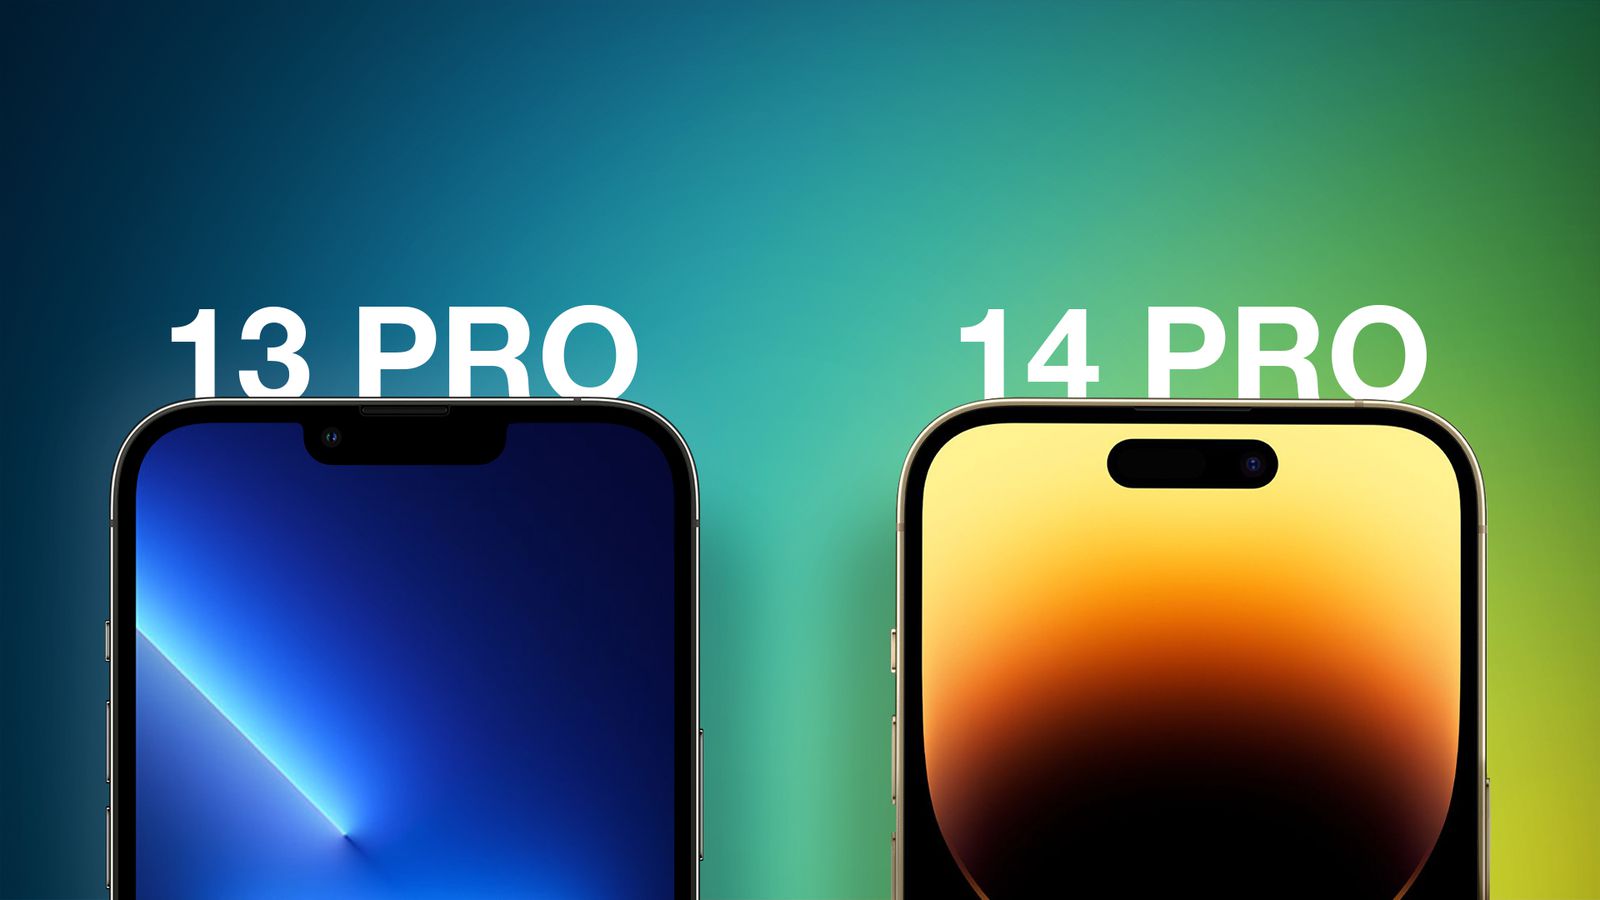 iphone-13-pro-vs-iphone-14-pro-buyer-s-guide-should-you